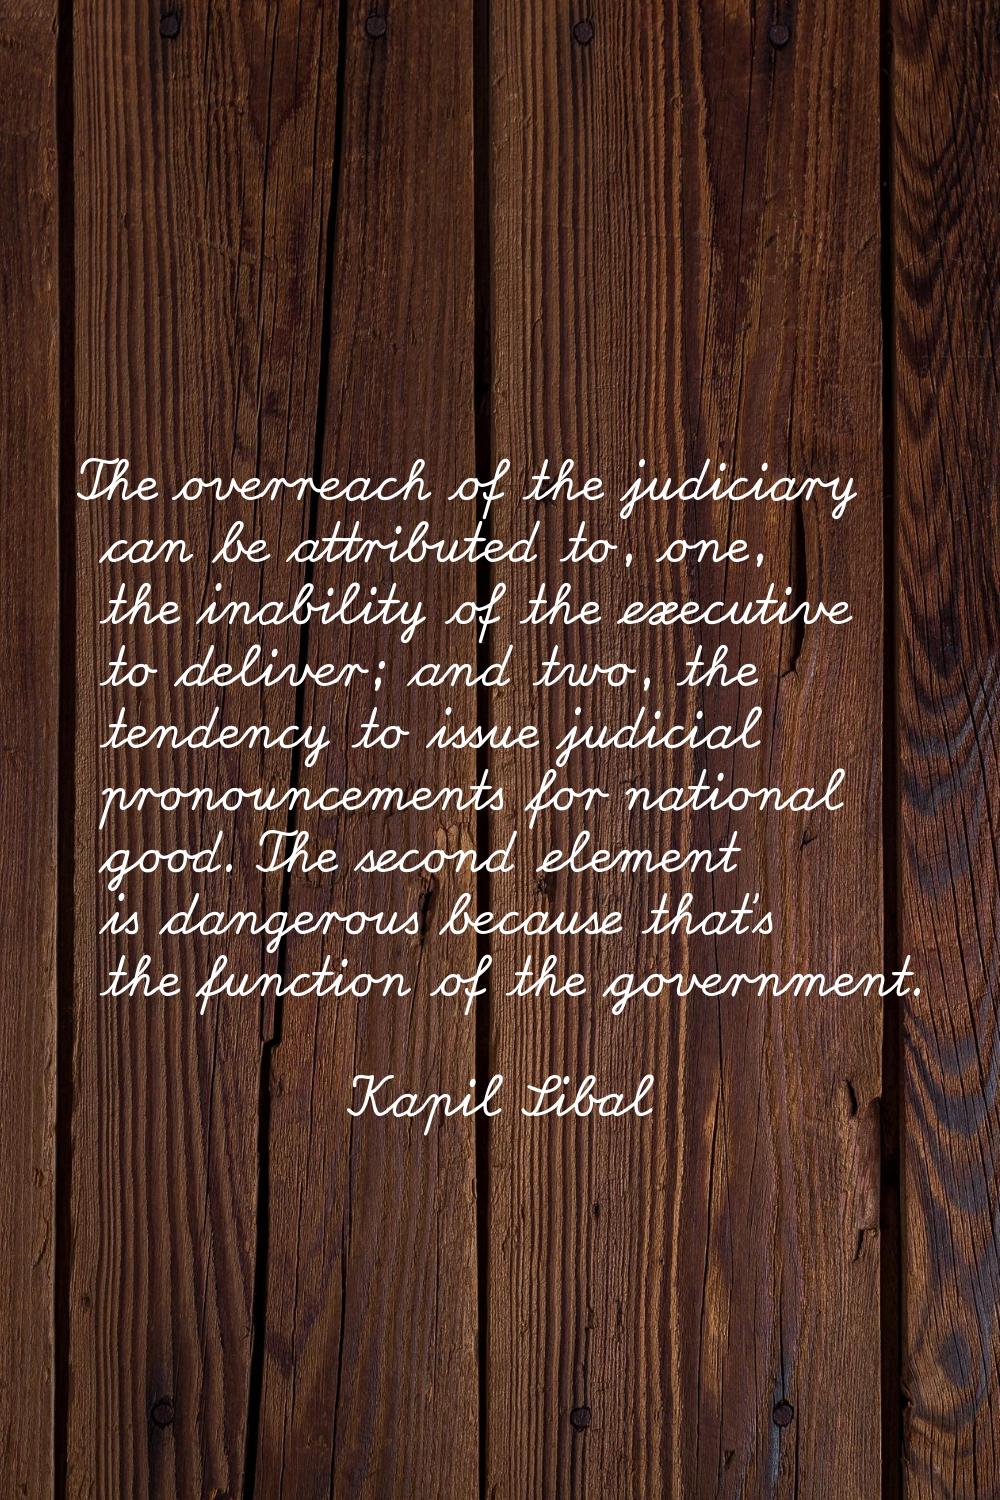 The overreach of the judiciary can be attributed to, one, the inability of the executive to deliver